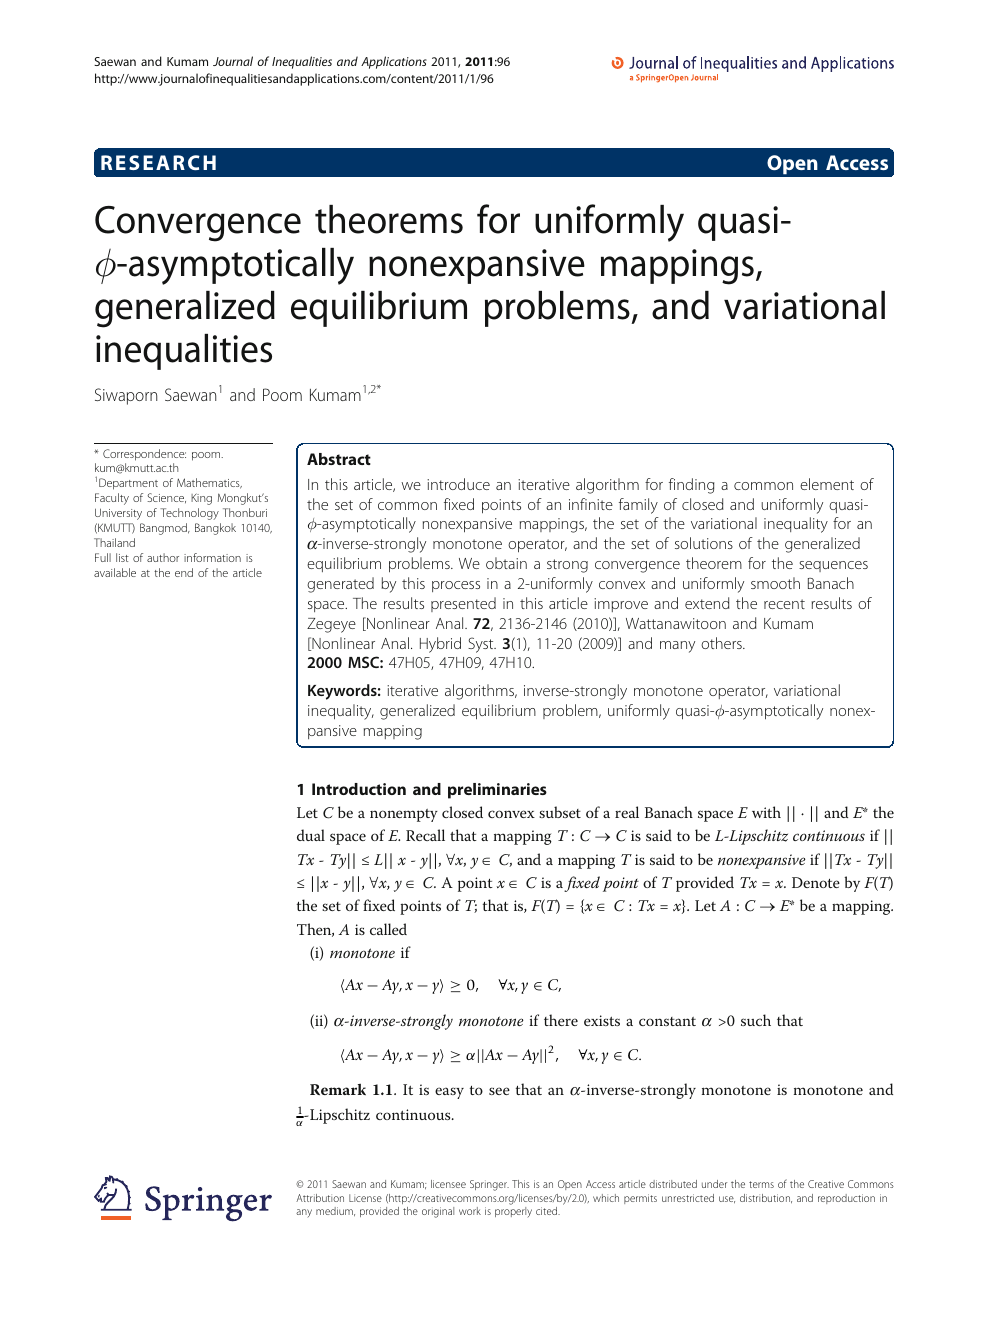 Convergence Theorems For Uniformly Quasi ϕ Asymptotically Nonexpansive Mappings Generalized Equilibrium Problems And Variational Inequalities Topic Of Research Paper In Mathematics Download Scholarly Article Pdf And Read For Free On Cyberleninka